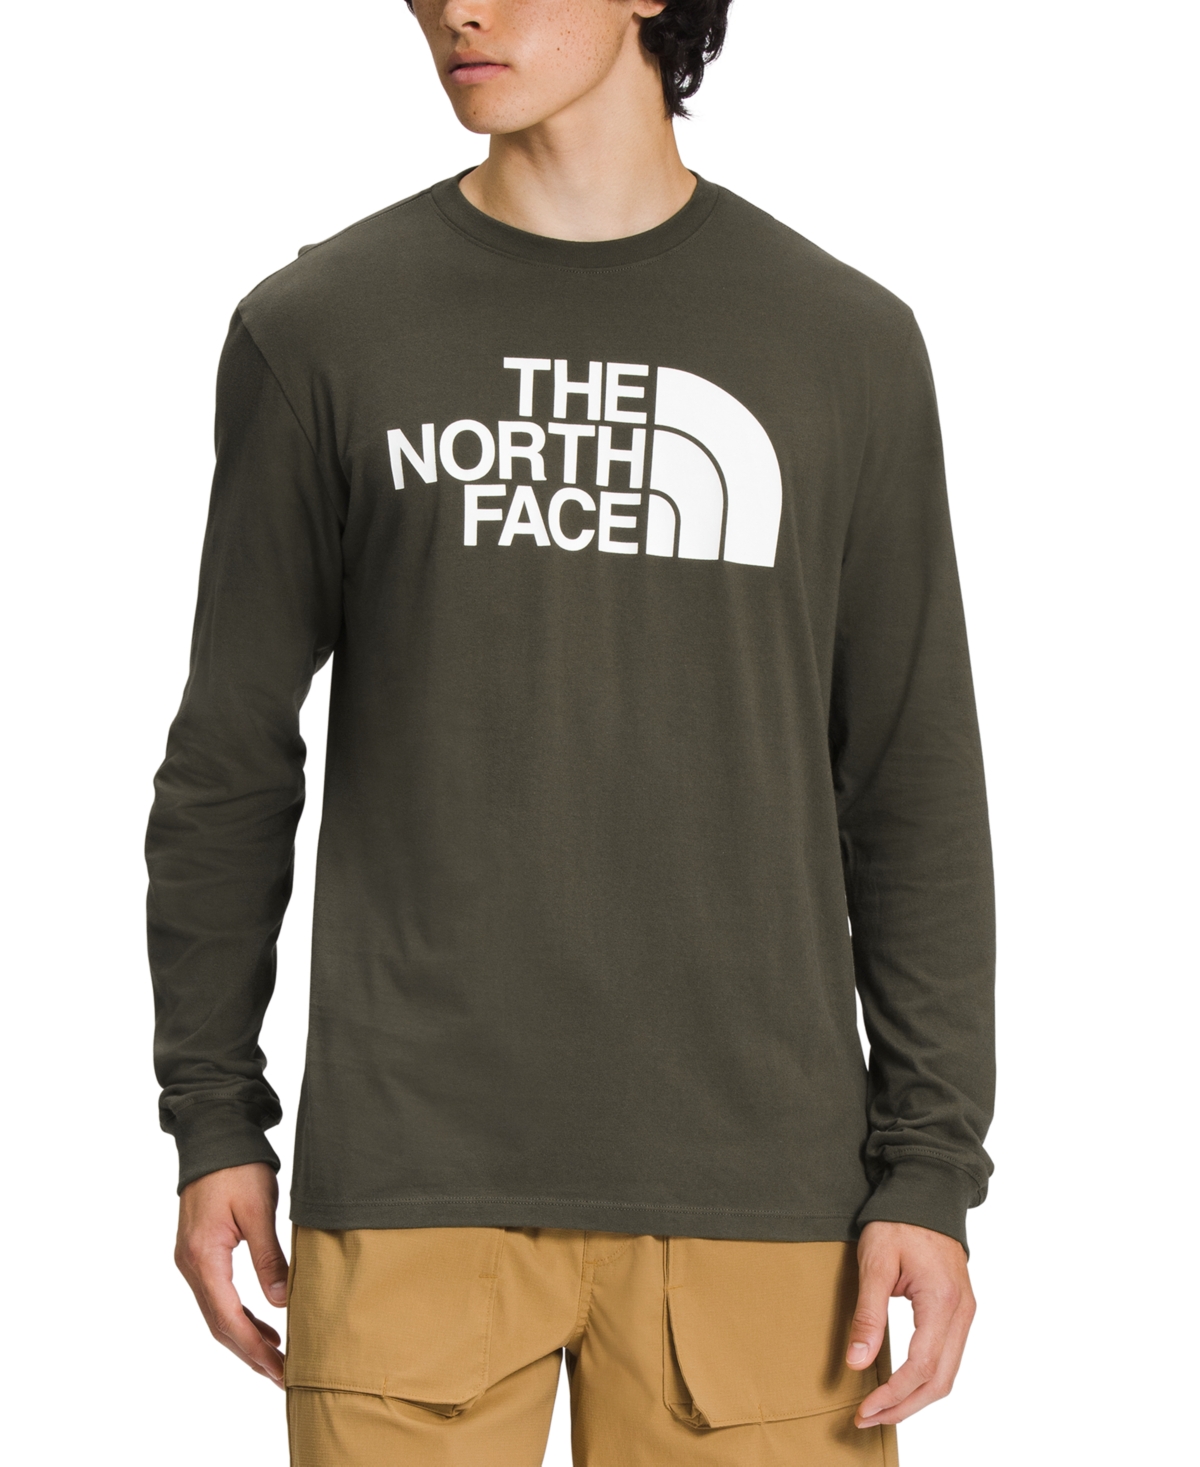 The North Face Mens L/s Half Dome Tee In New Taupe Green,tnf White